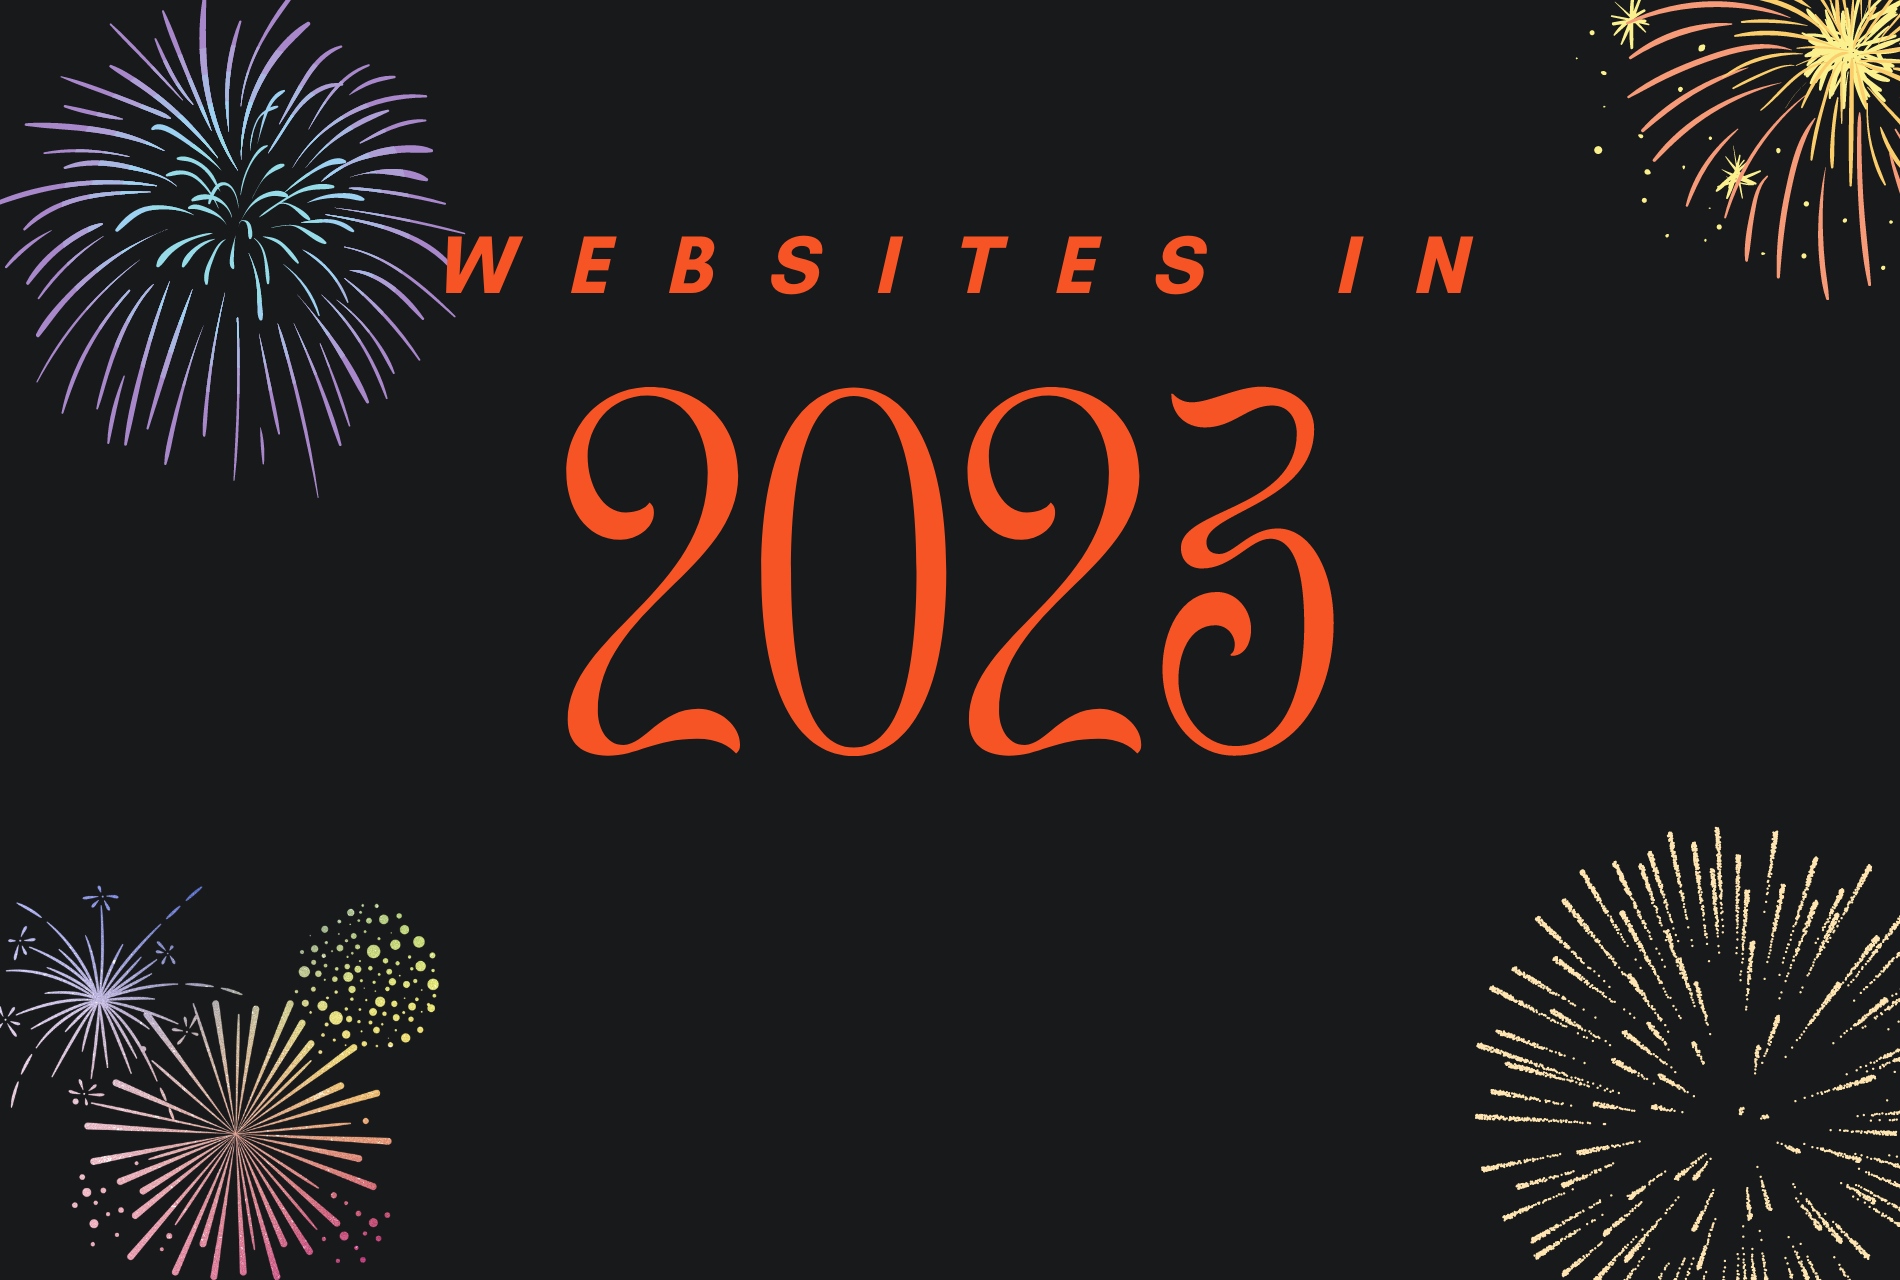 Why Do You Need A Website In 2023?